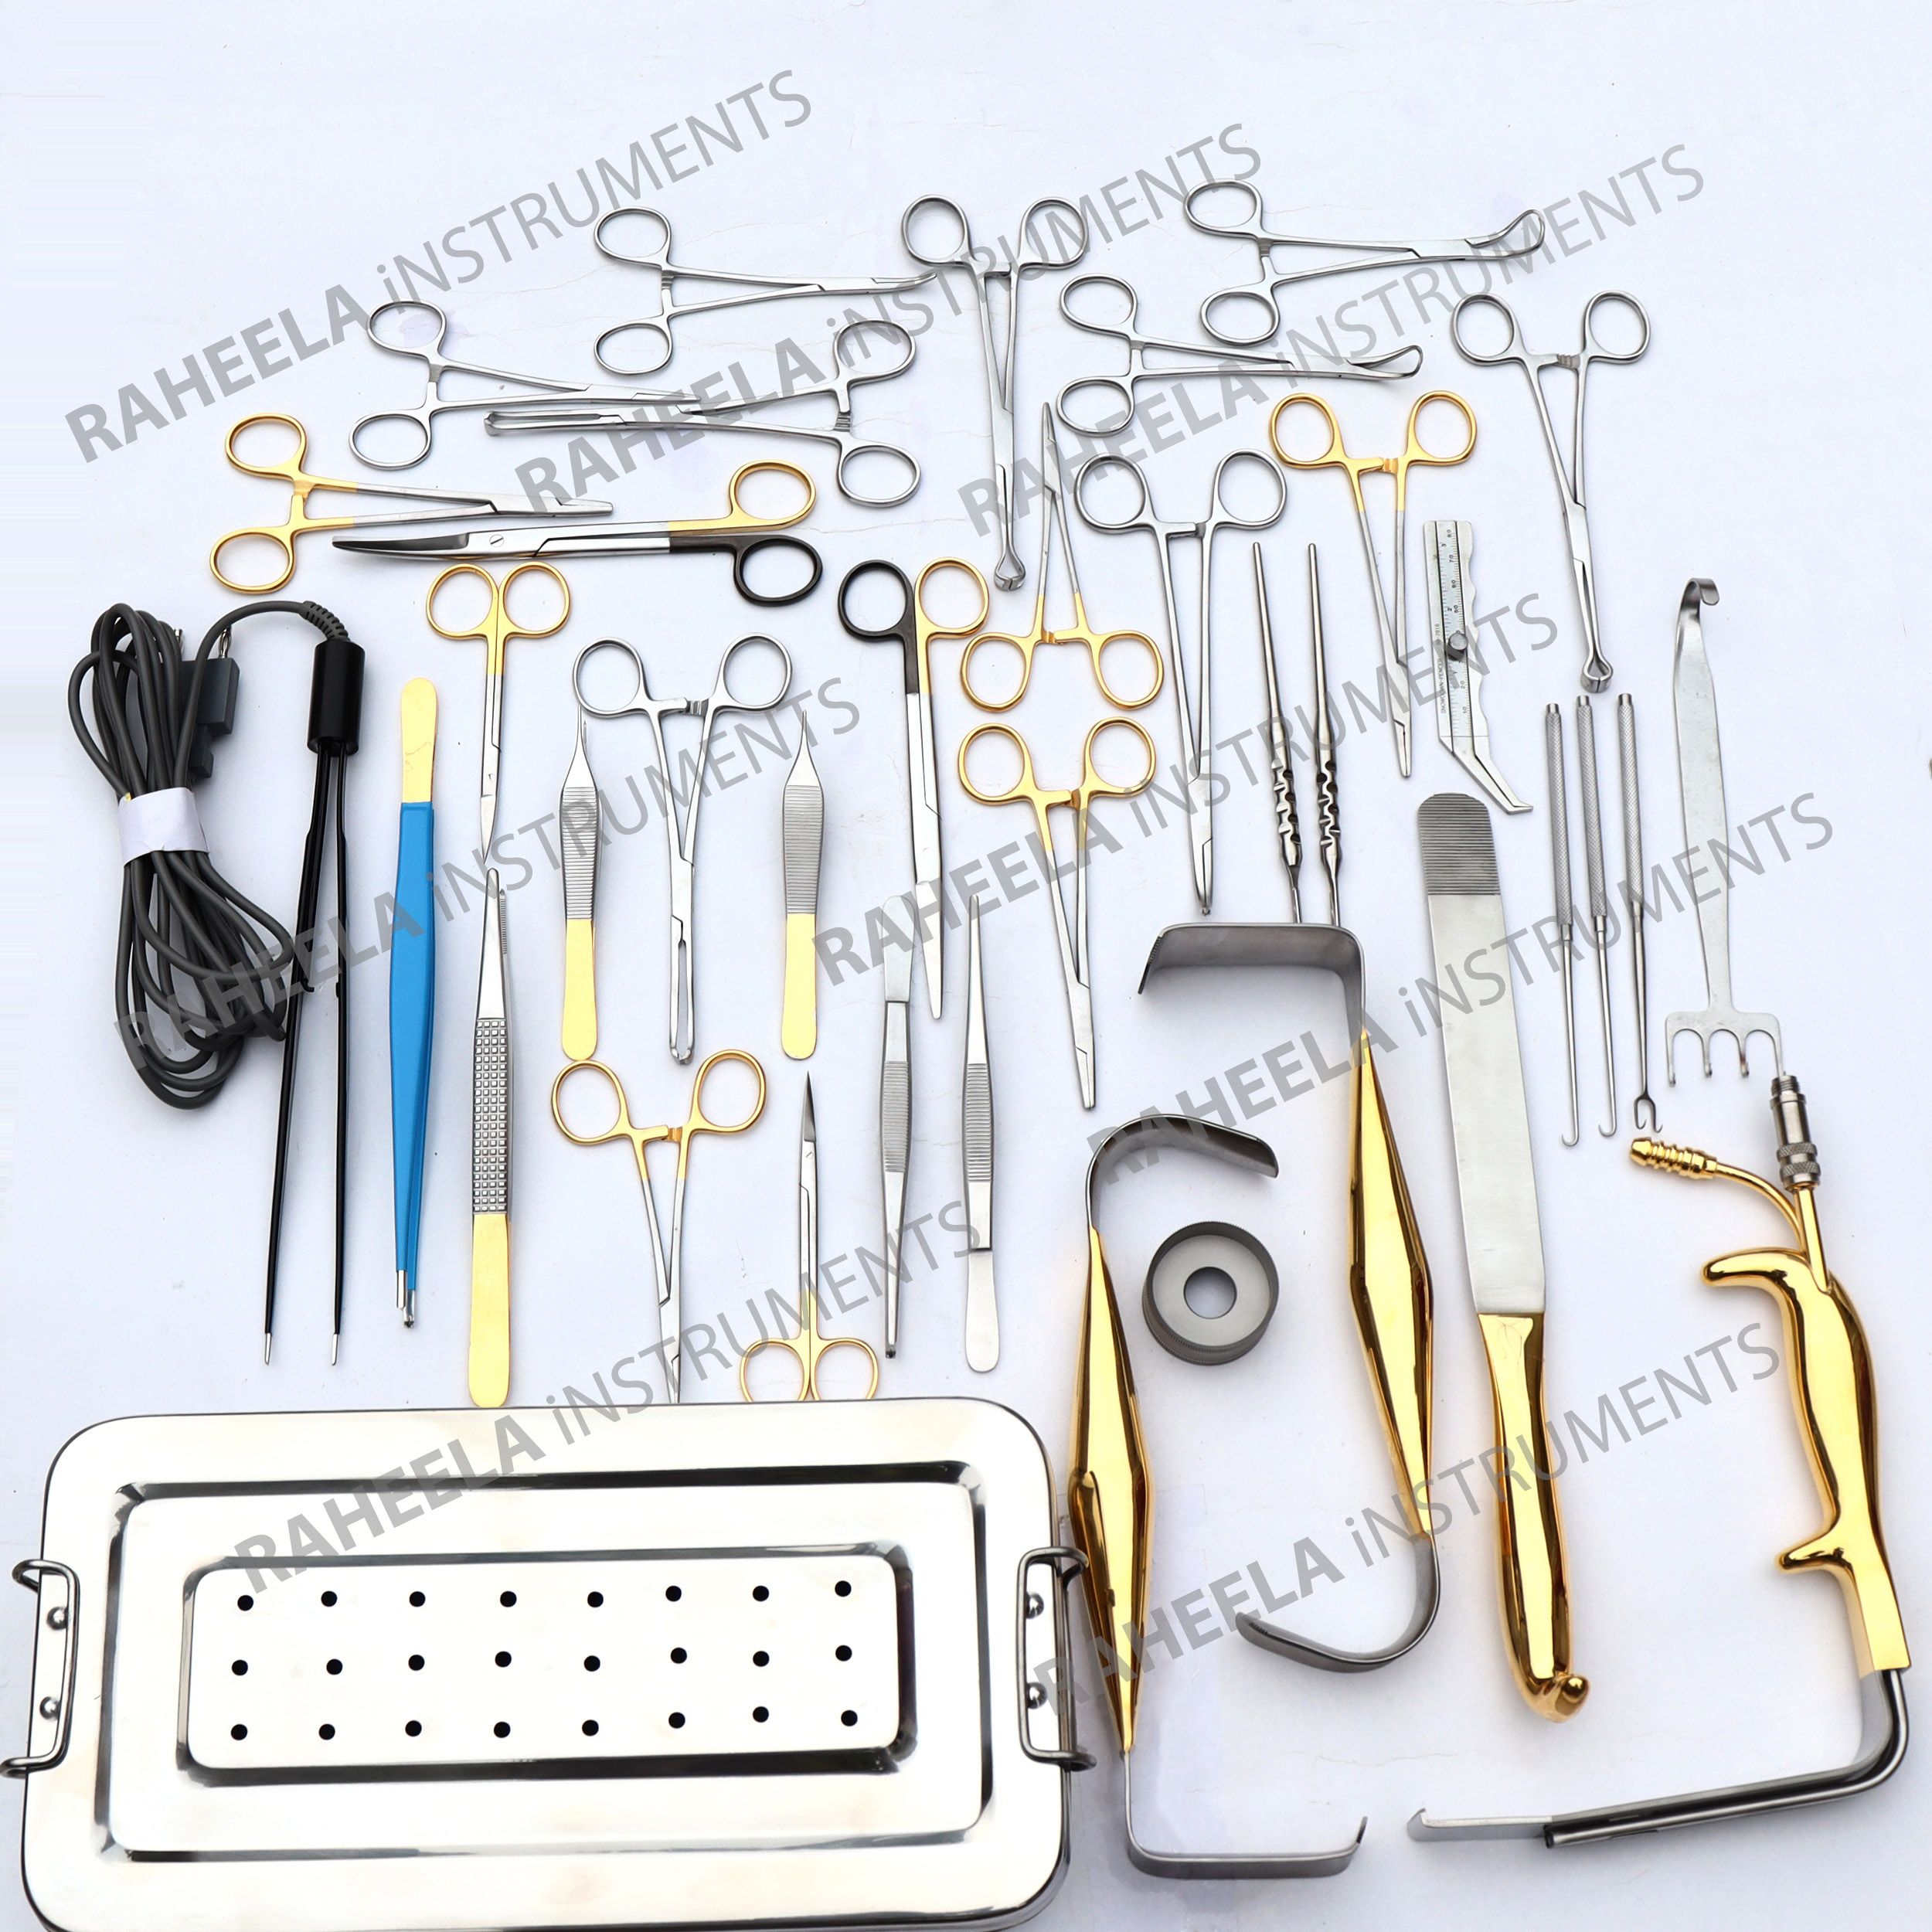 Breast Surgery Instruments